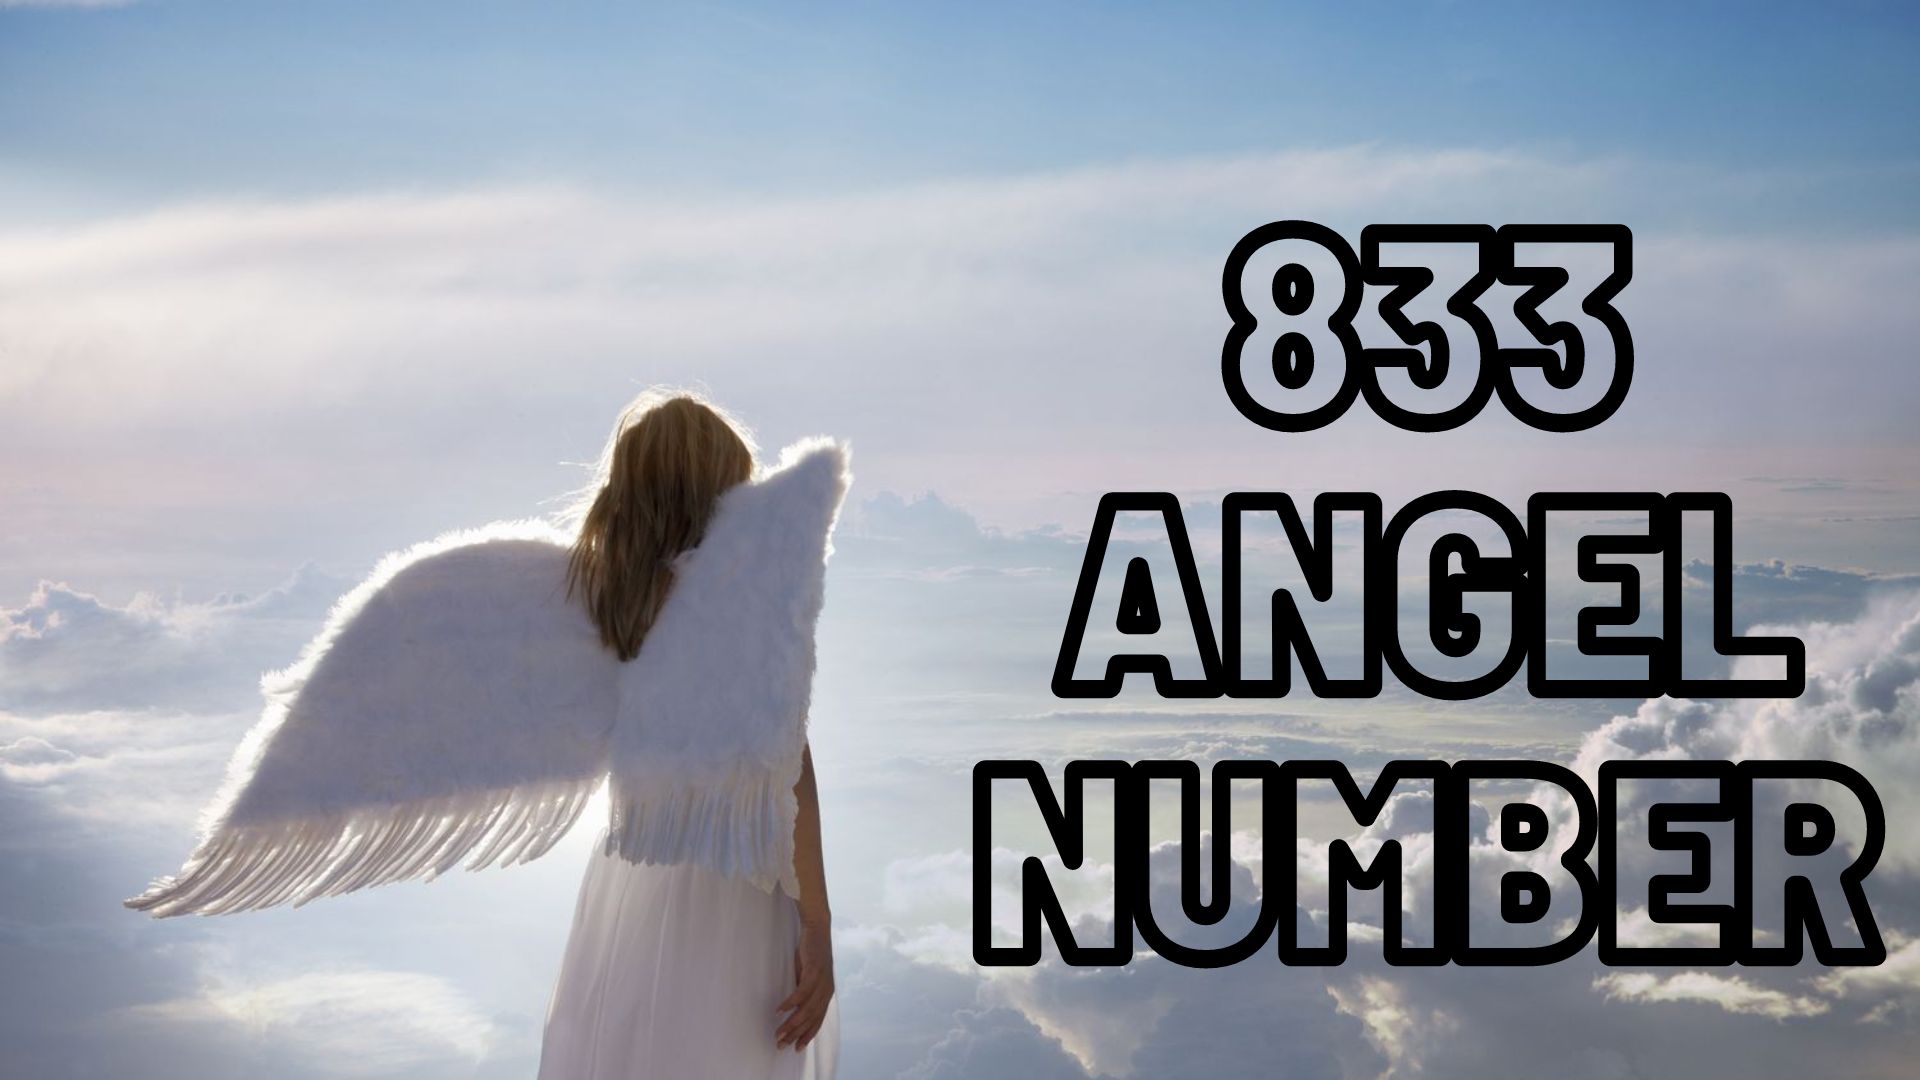 833 Angel Number - Represents Cohesion